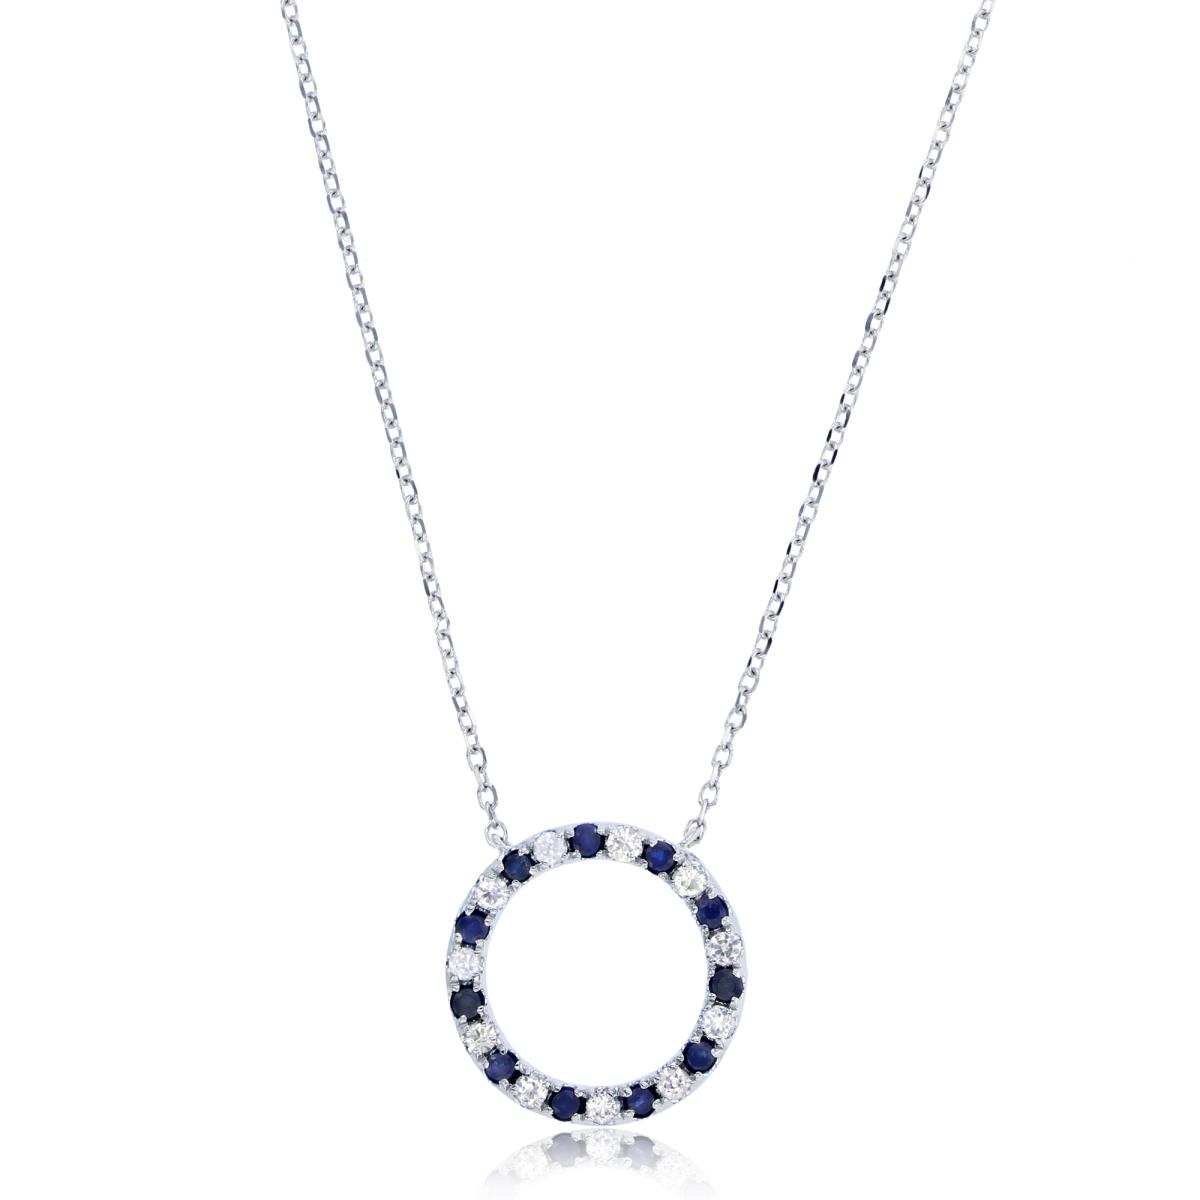 14K White Gold 1.5mm Rnd Blue & White Sapphire Open Circle 18"Necklace